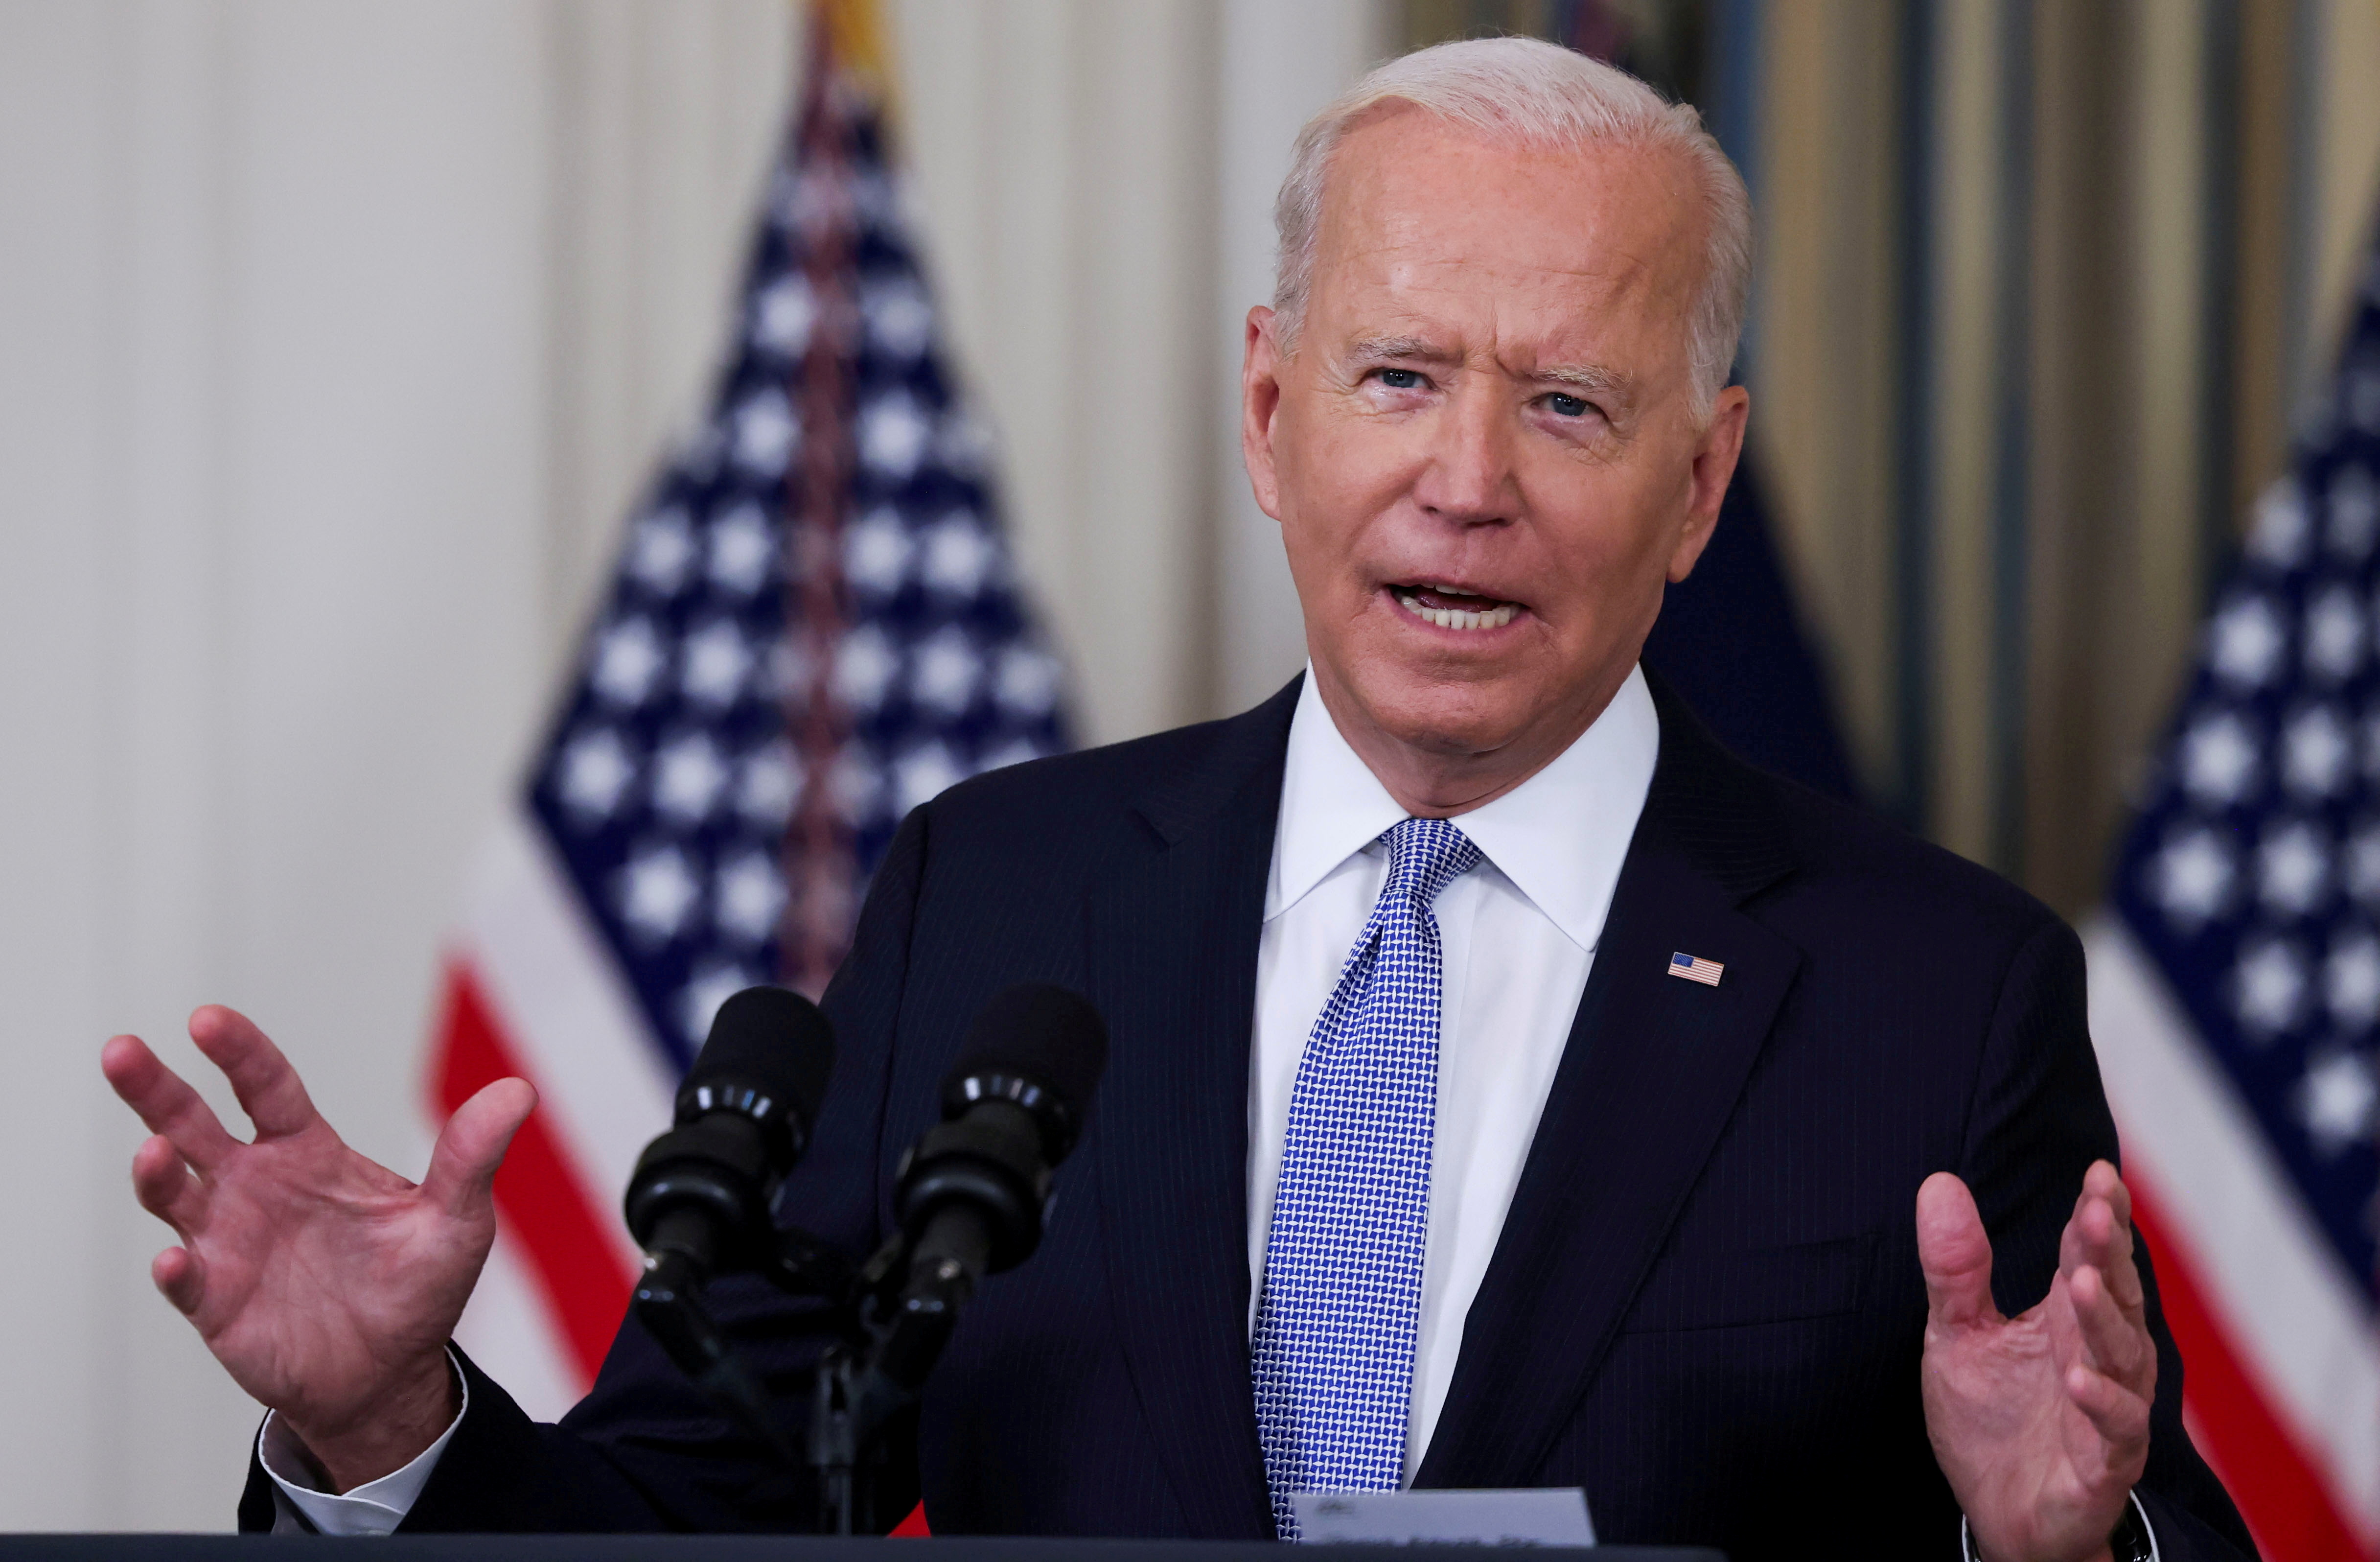 President Biden speaks about coronavirus disease (COVID-19) vaccines and booster shots at the White House in Washington, September 24, 2021. REUTERS/Evelyn Hockstein/File Photo